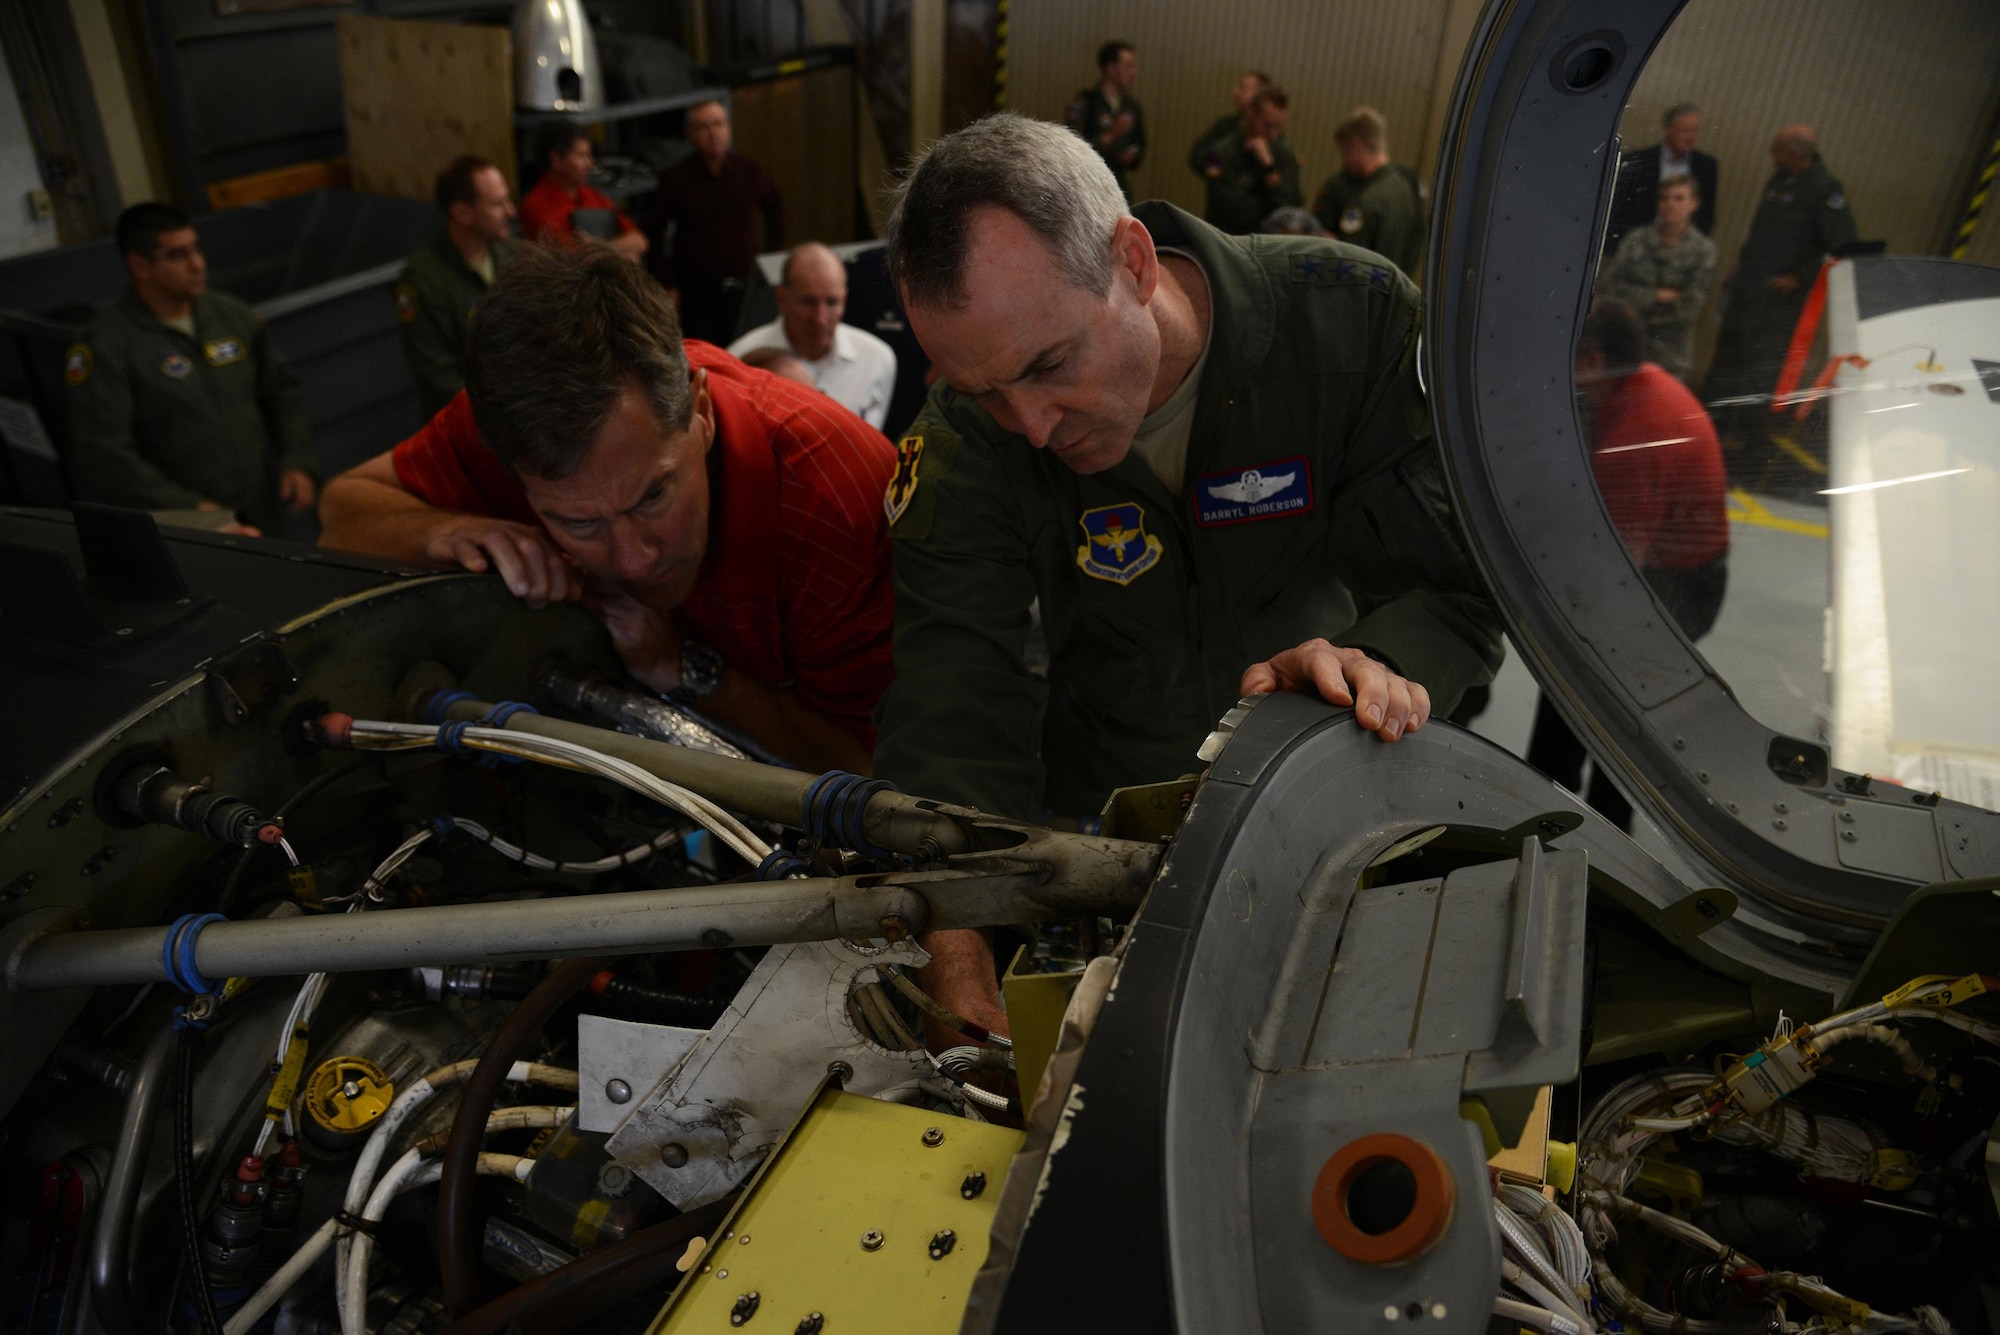 Lt. Gen. Darryl Roberson, commander of Air Education and Training Command, examines the internal structure of a T-6A Texan II aircraft with Russ Bartlett, defense contractor, on Laughlin Air Force Base, Texas, Nov. 16, 2015. The T-6 is a single-engine, two-seat, primary trainer designed to train student pilots on basic flying skills. (U.S. Air Force photo by Airman 1st Class Ariel D. Partlow)